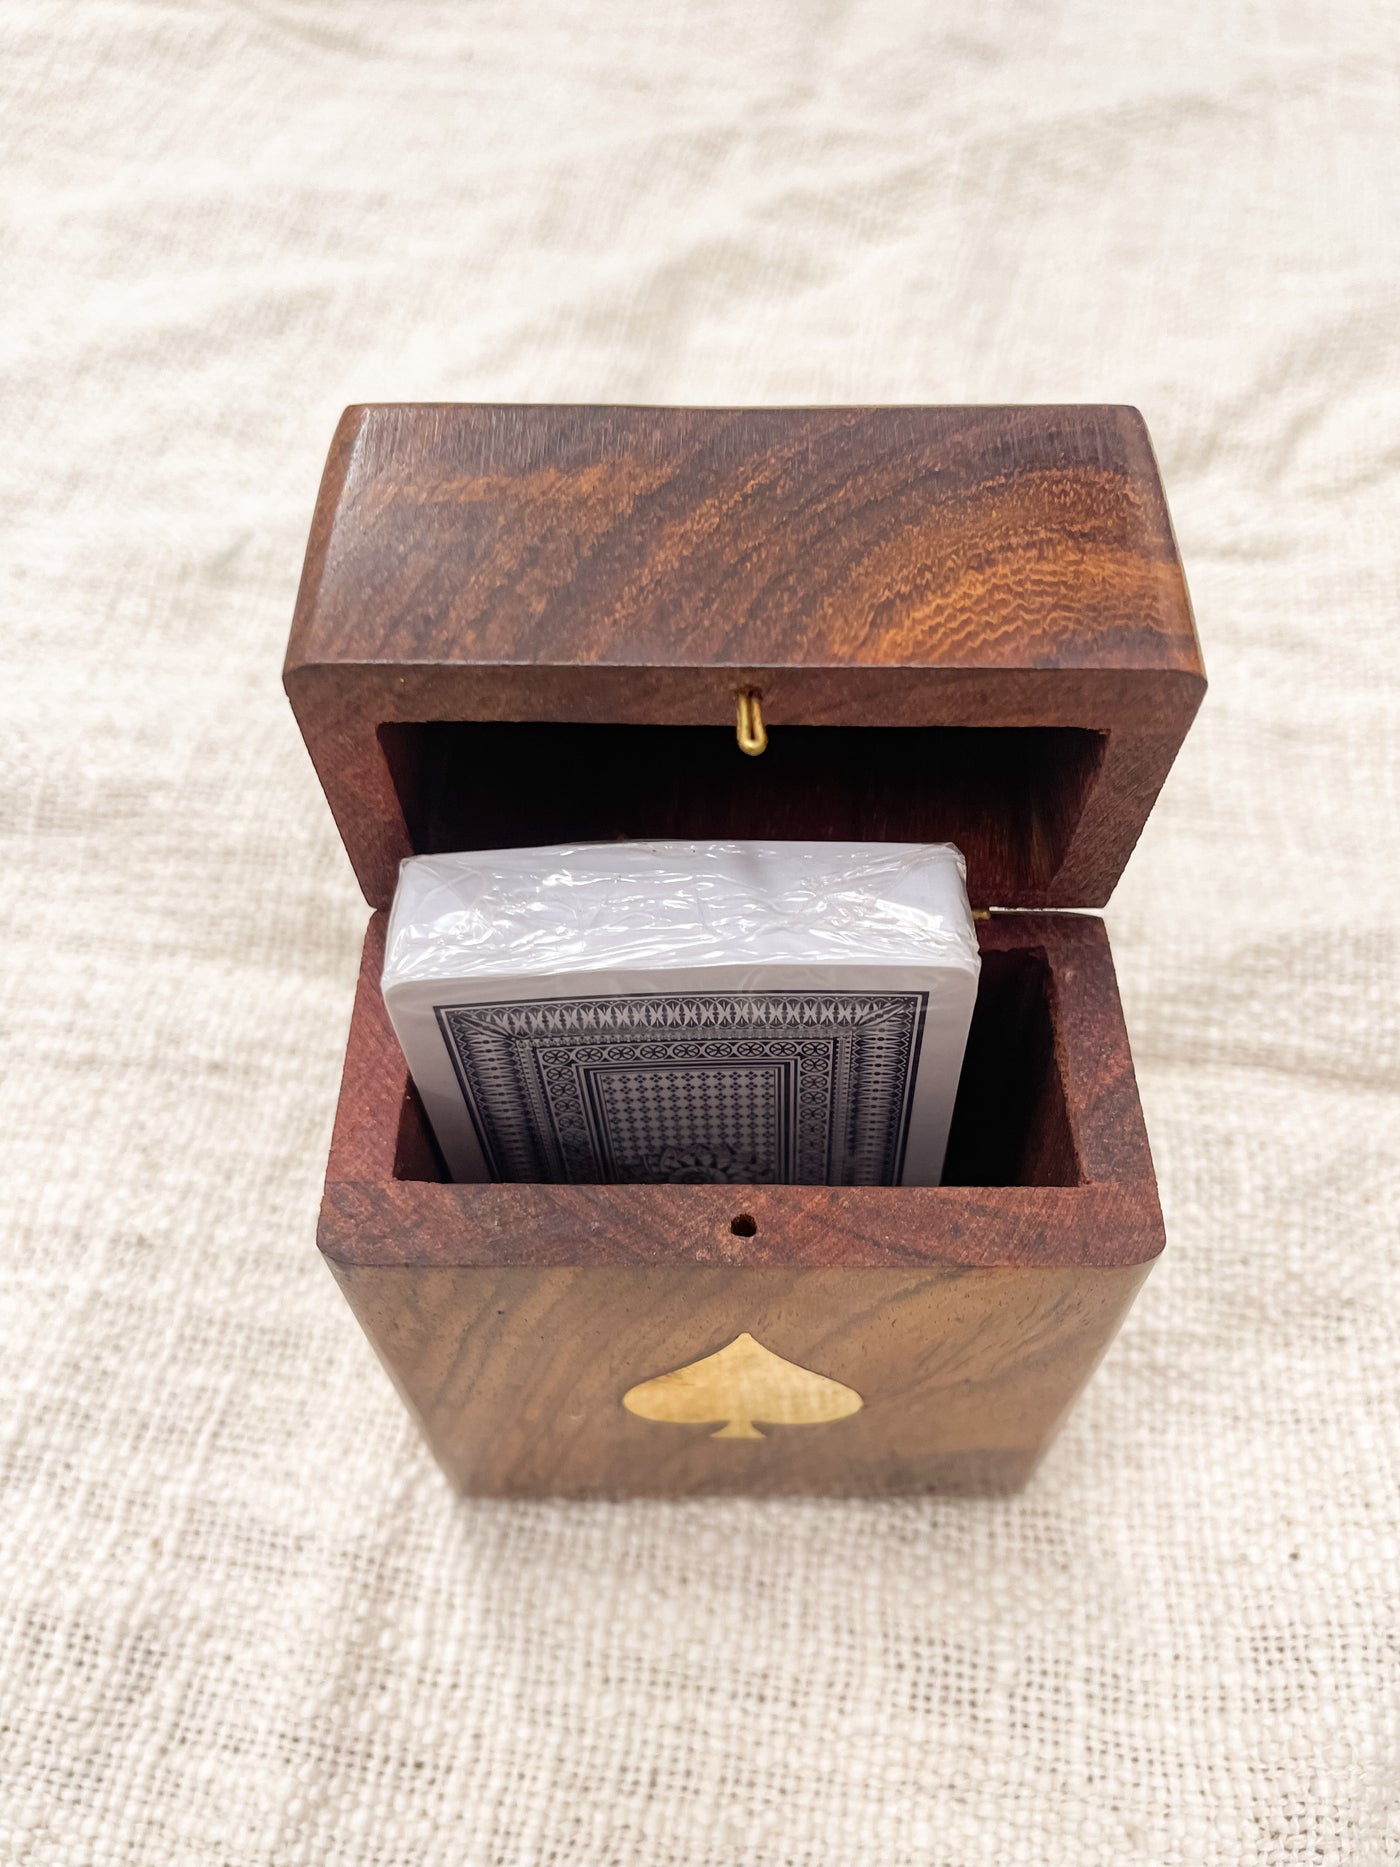 Wood Crafted Playing Card Set In Wooden Box